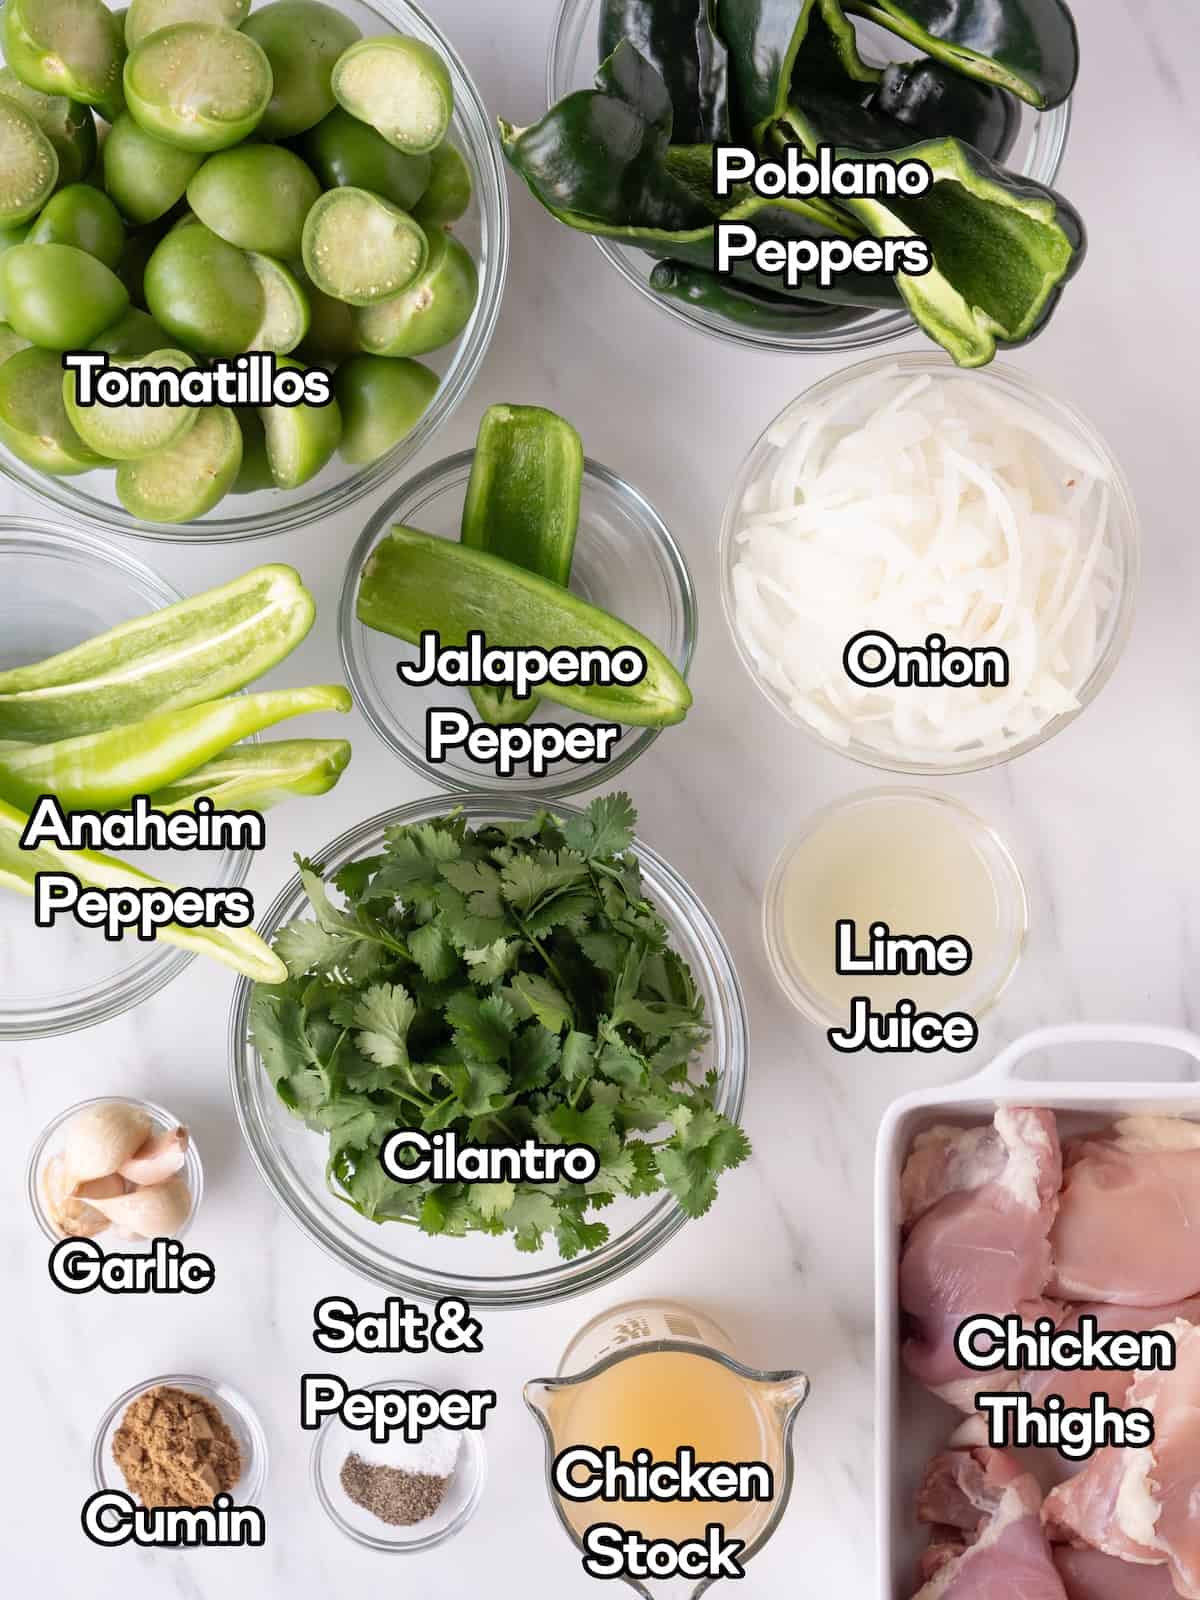 Mise-en-place of all the ingredients to make chicken chili verde.